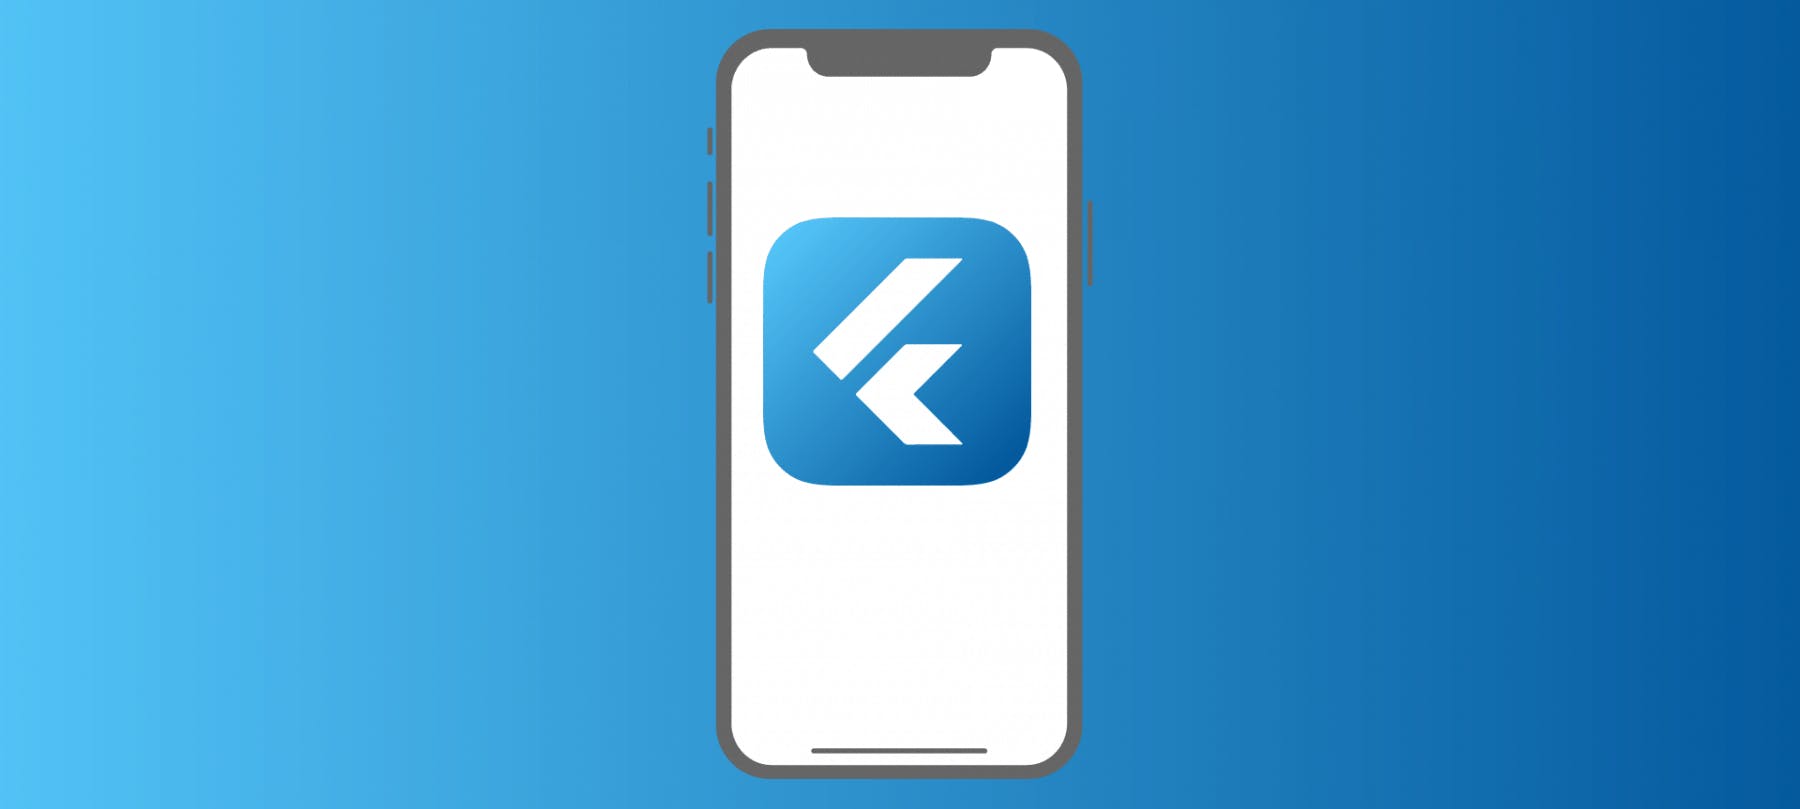 flutter-for-ios-developers-1-1800x809.png